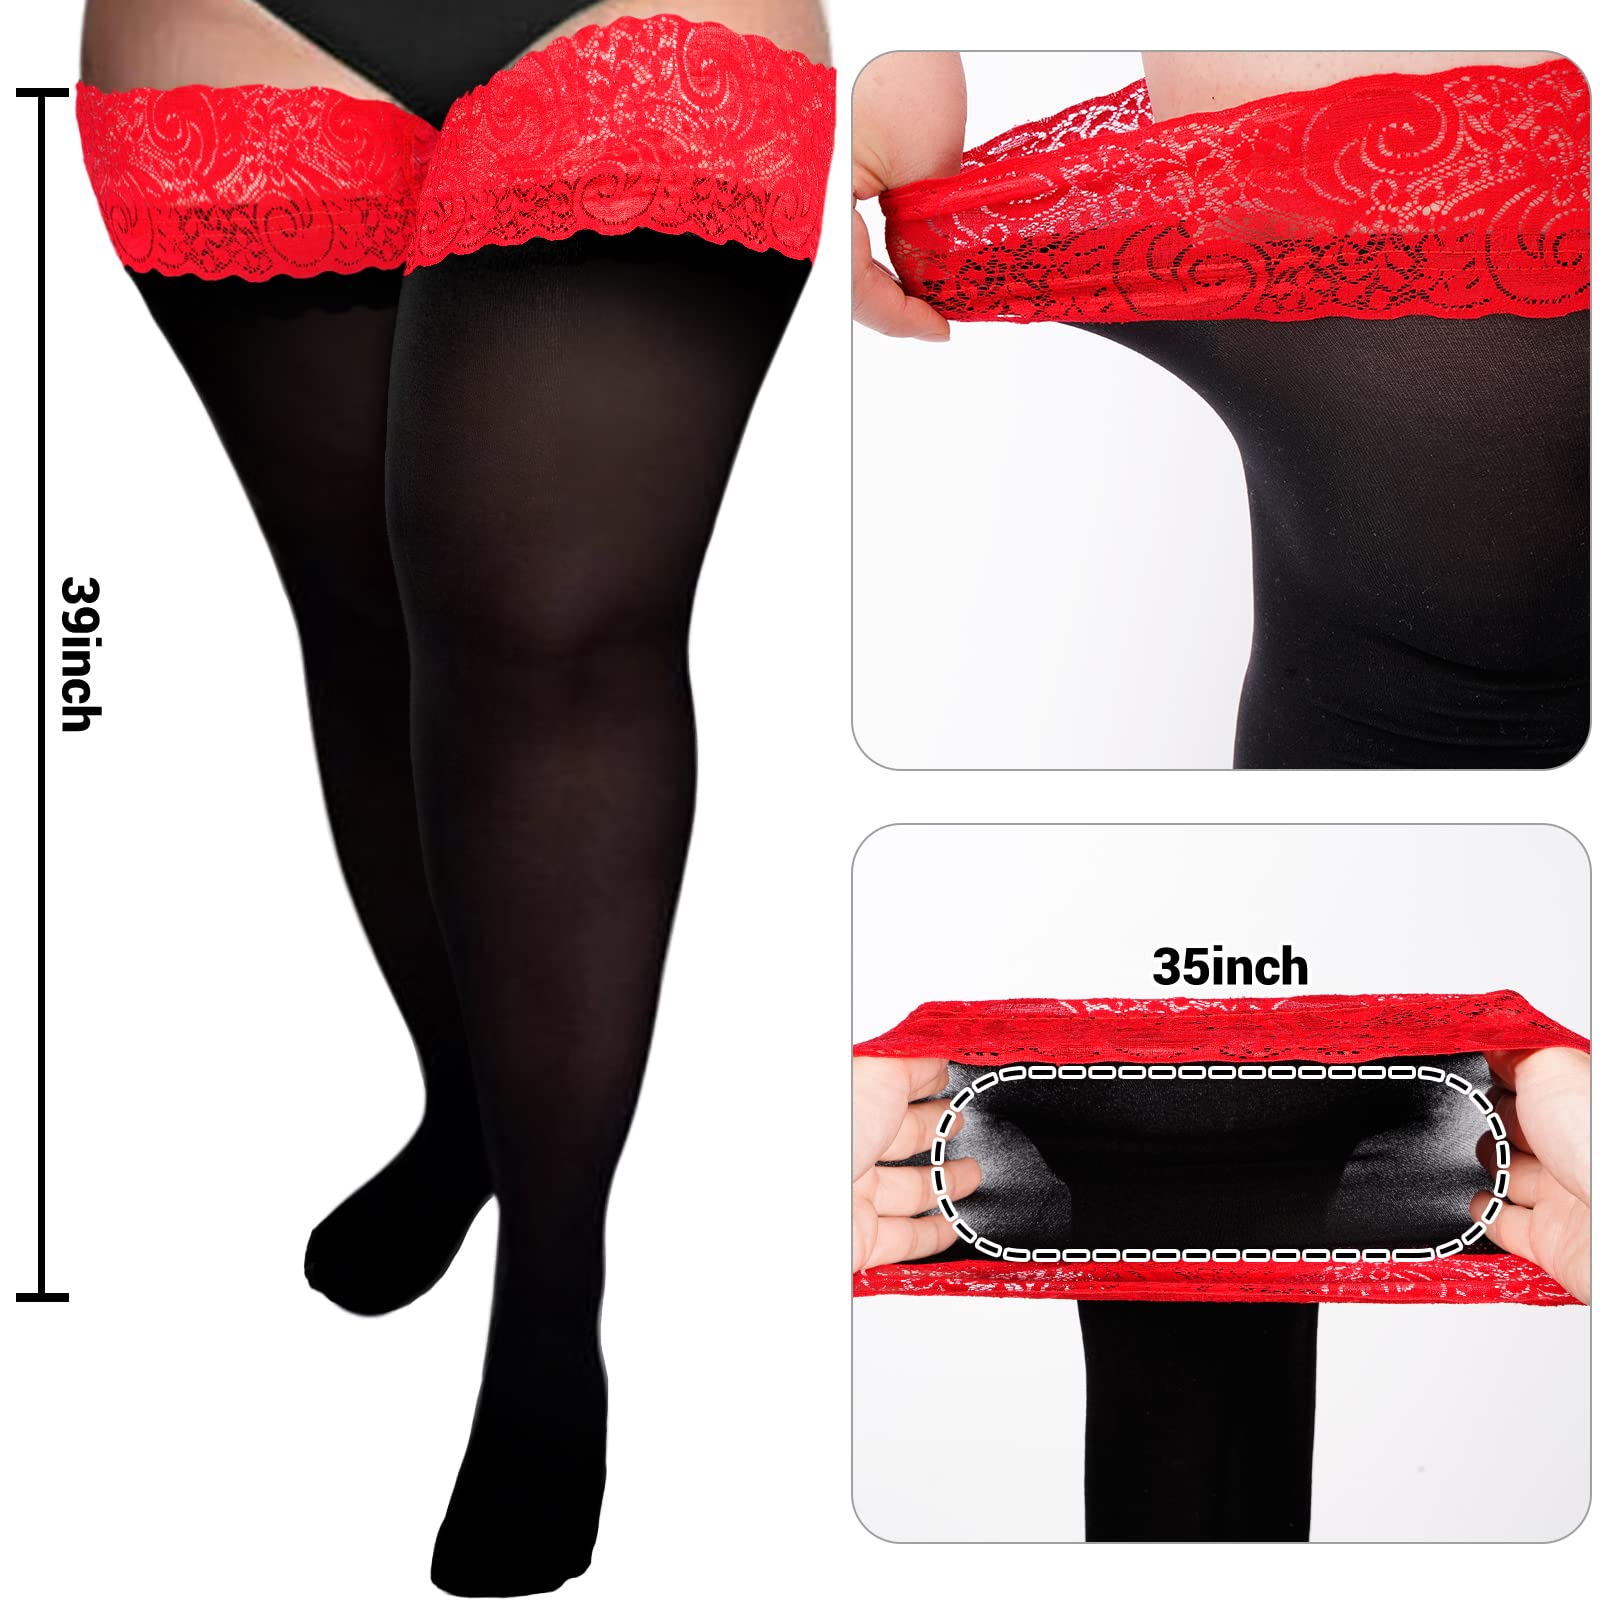 55D Semi Sheer Silicone Lace Stay Up Thigh Highs Pantyhose-Black & Red Lace - Moon Wood